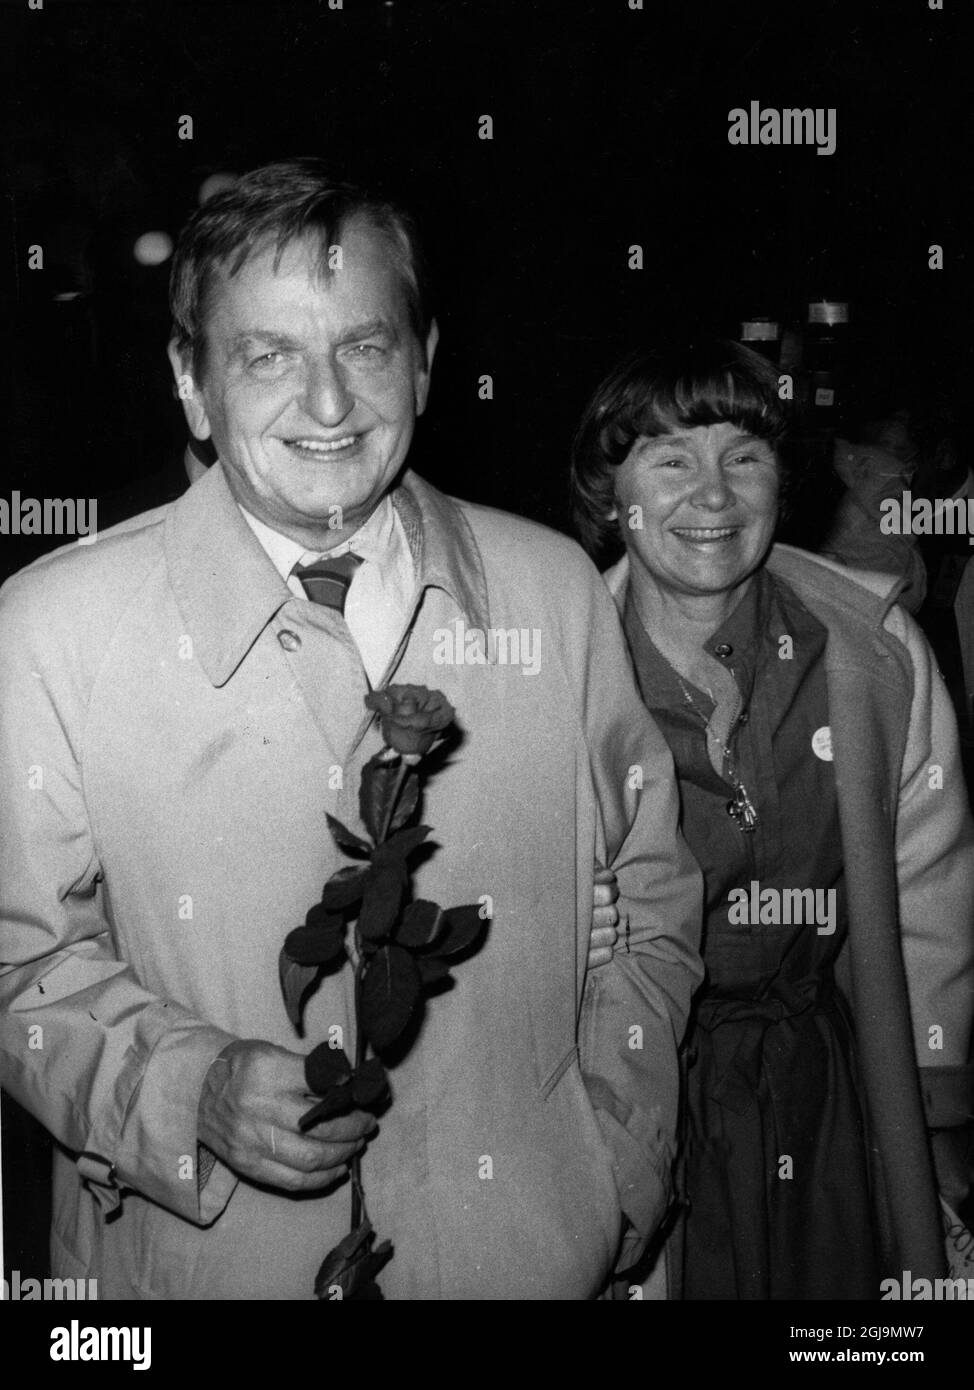 19850915 STOCKHOLM. Prime Minister Olof Palme and his wife Lisbeth after parliamentary elections in 1985. It is 25 years since former Swedish Prime Minister and Party Leader of the Social Democrats Olof Palme was shot to death at the Sveavagen street in central Stockholm, February 28, 1986. Foto: Sven-Erik Sjoberg / SCANPIX code 53  Stock Photo